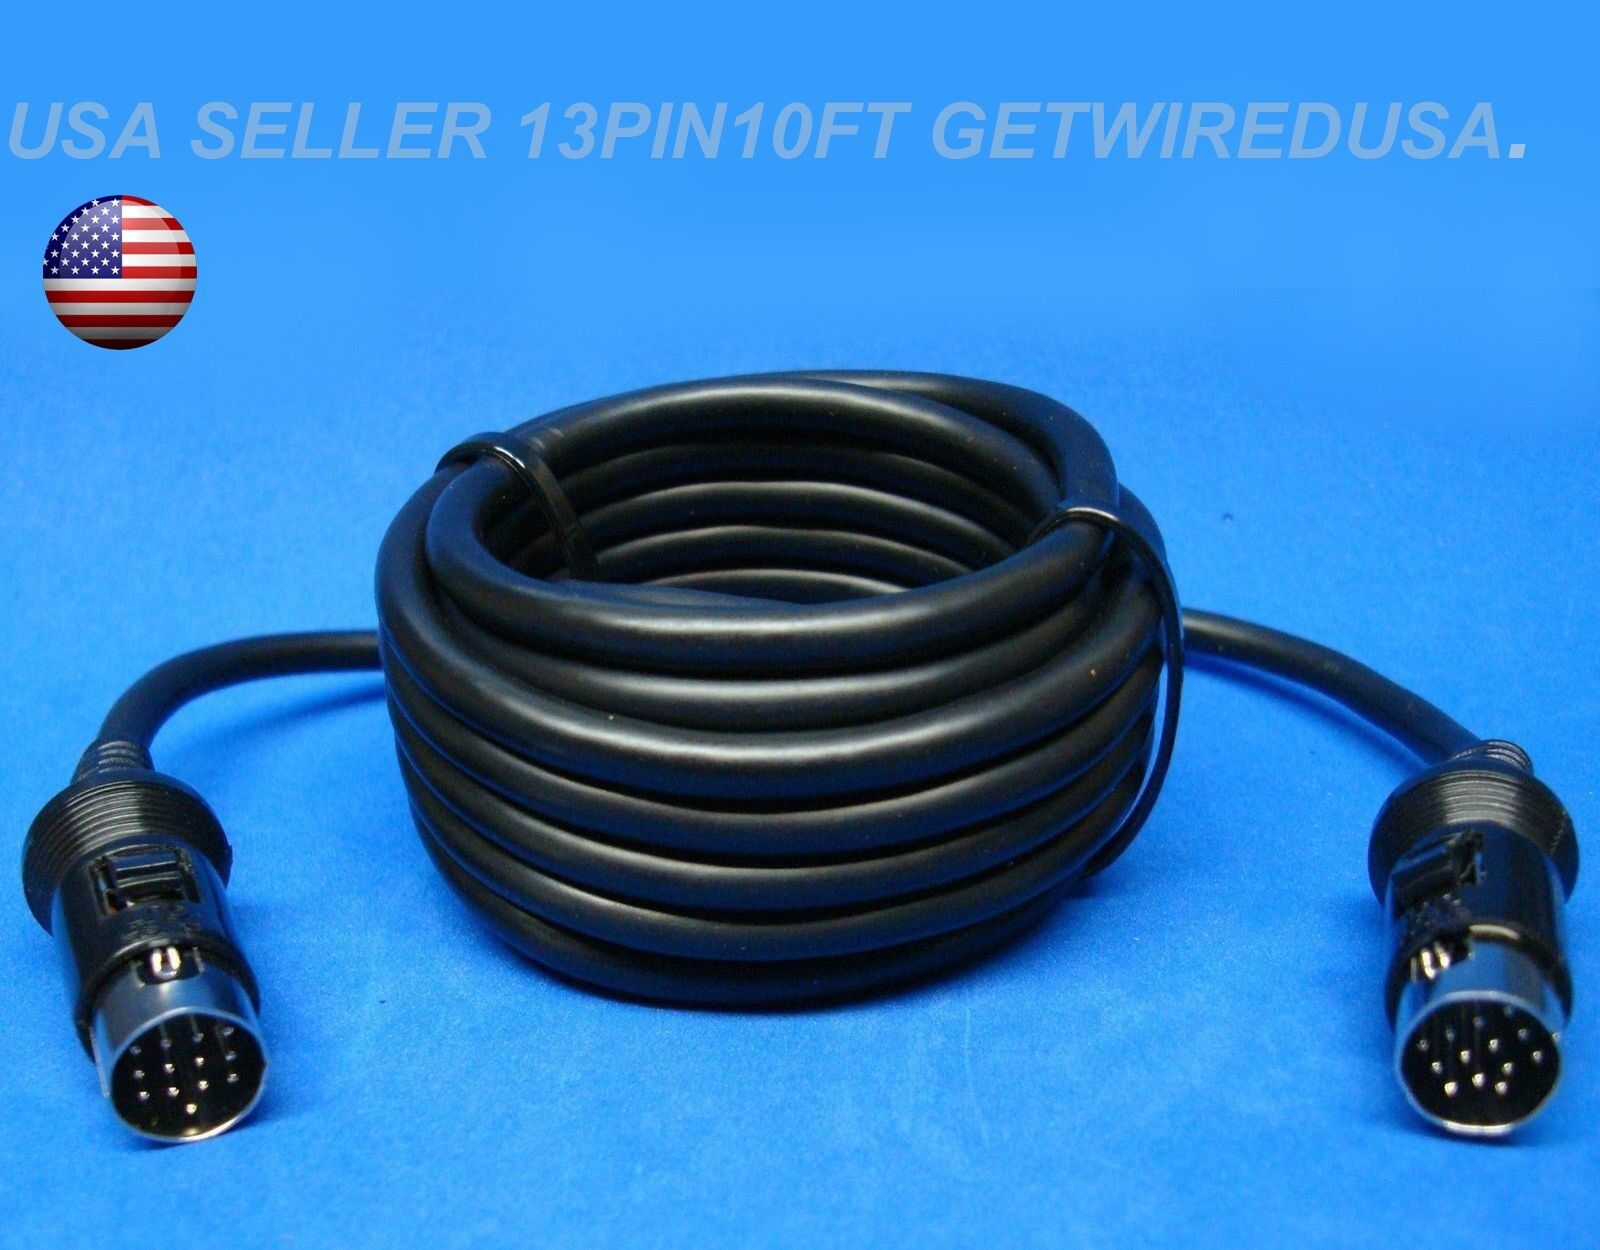 usa seller. LOCKING 13 PIN CABLE SYNTH ROLAND GKC-3 VG-8 GR VG GK 2A MOORE 10-FT